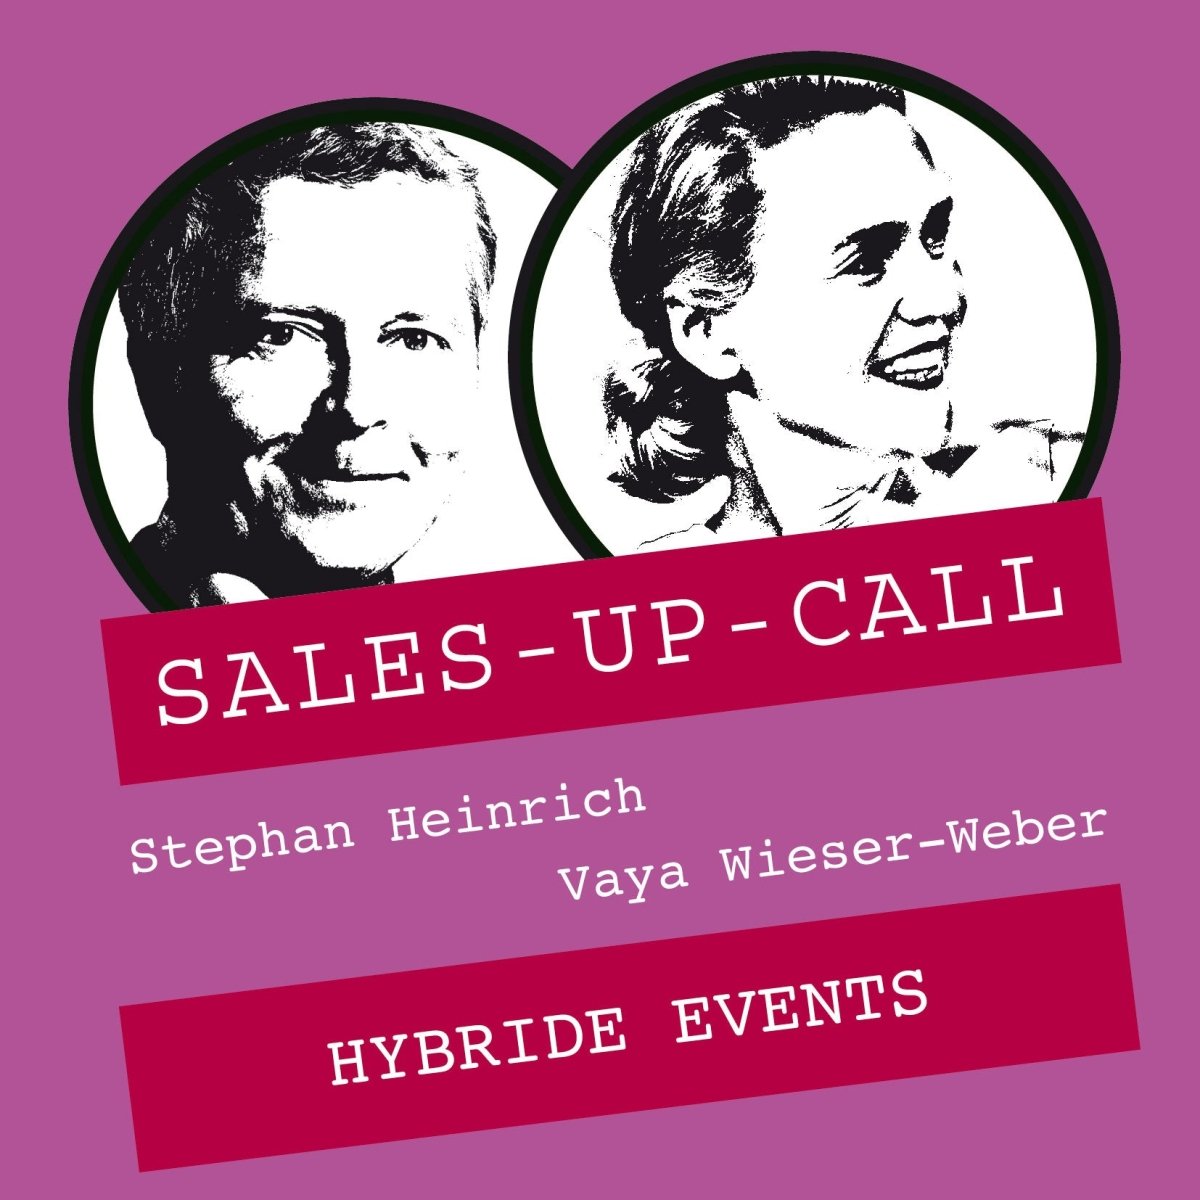 Hybride Events - Sales-up-Call